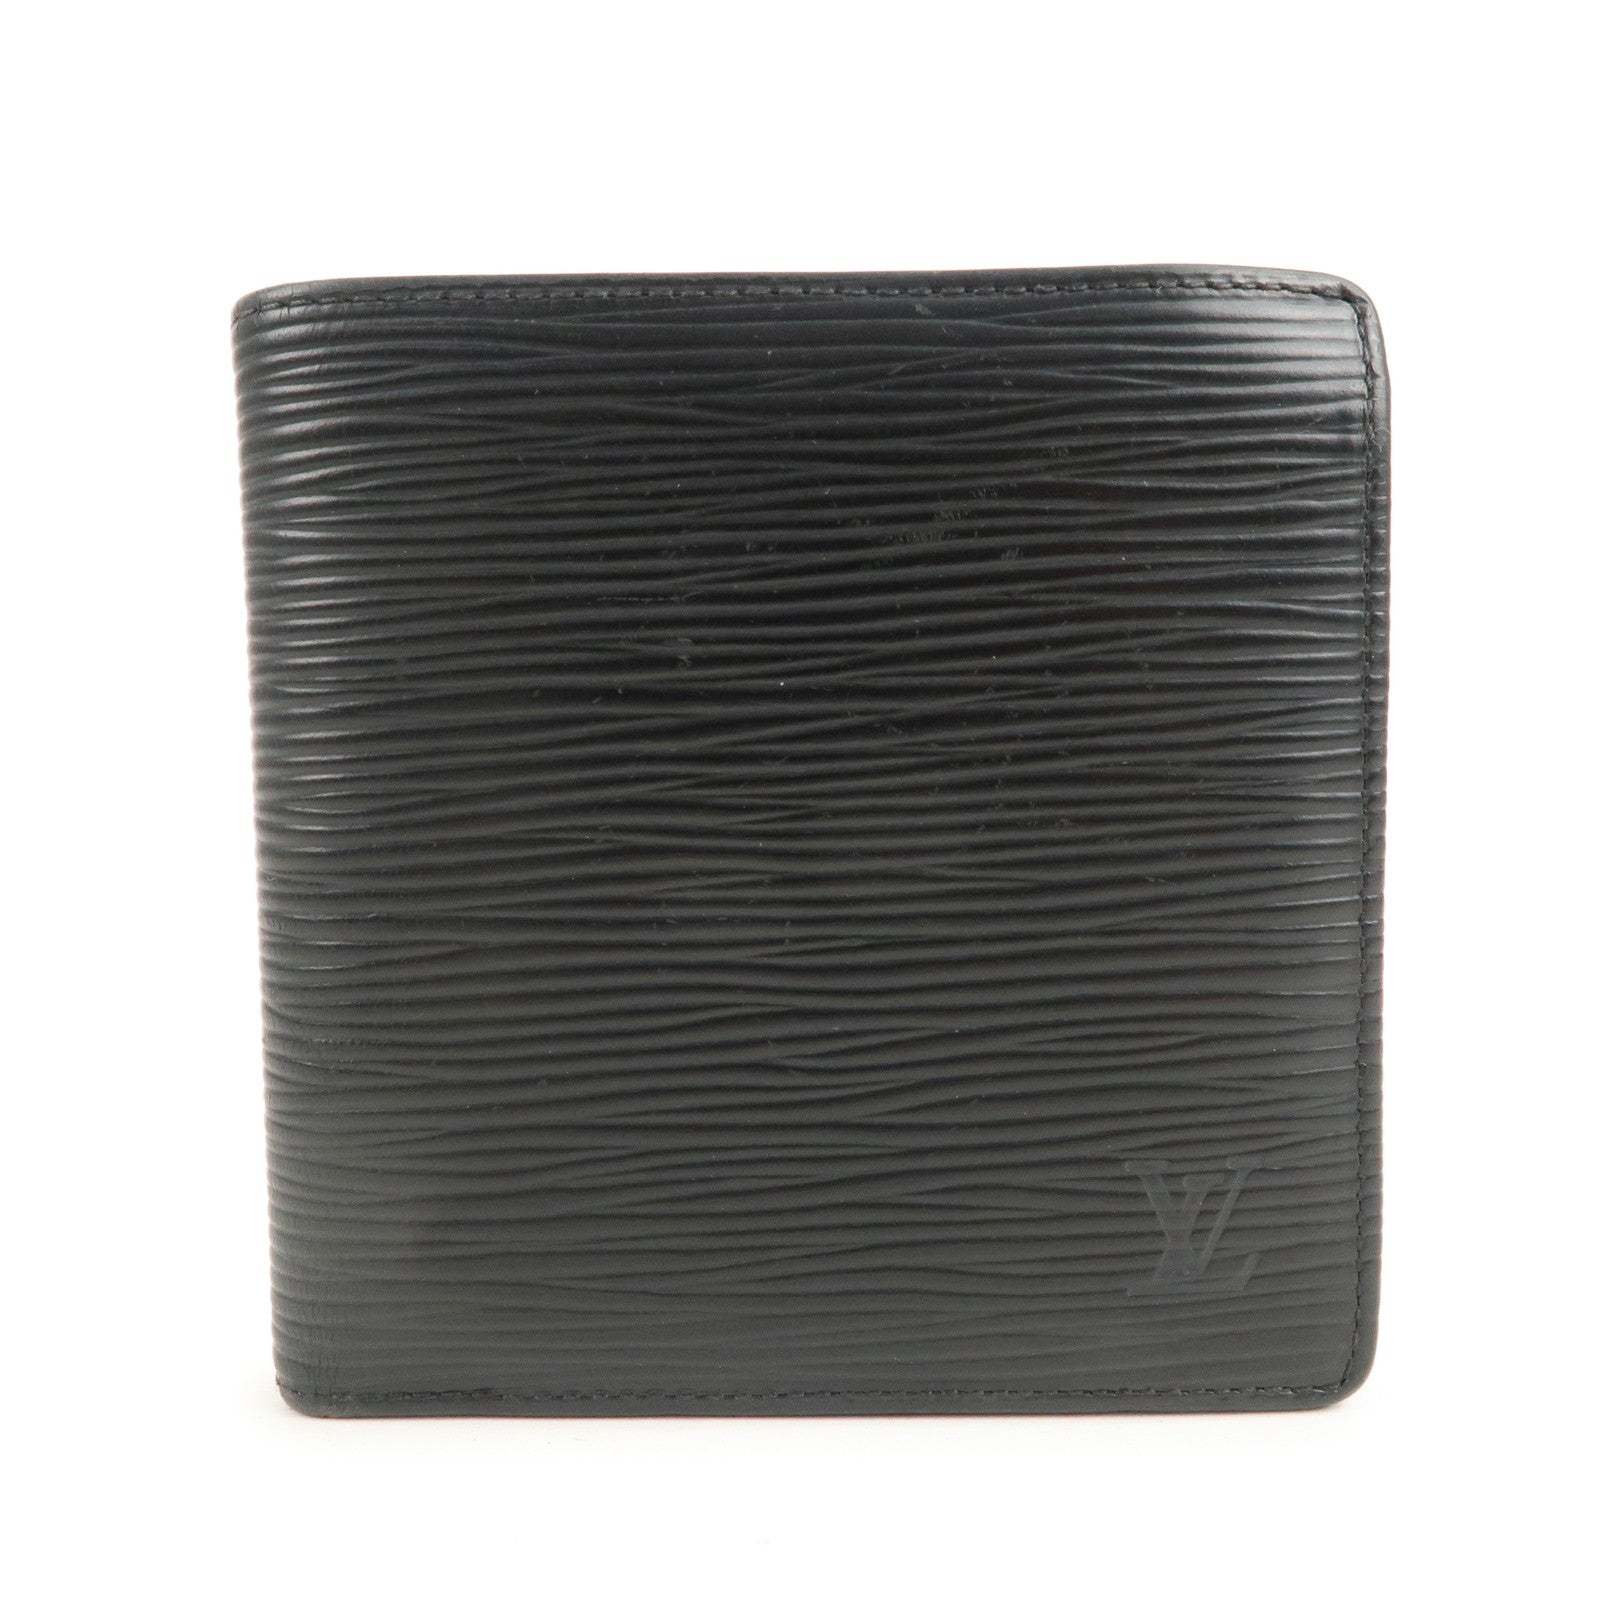 New in Box Louis Vuitton 2 Tone Credit Card Case For Sale at